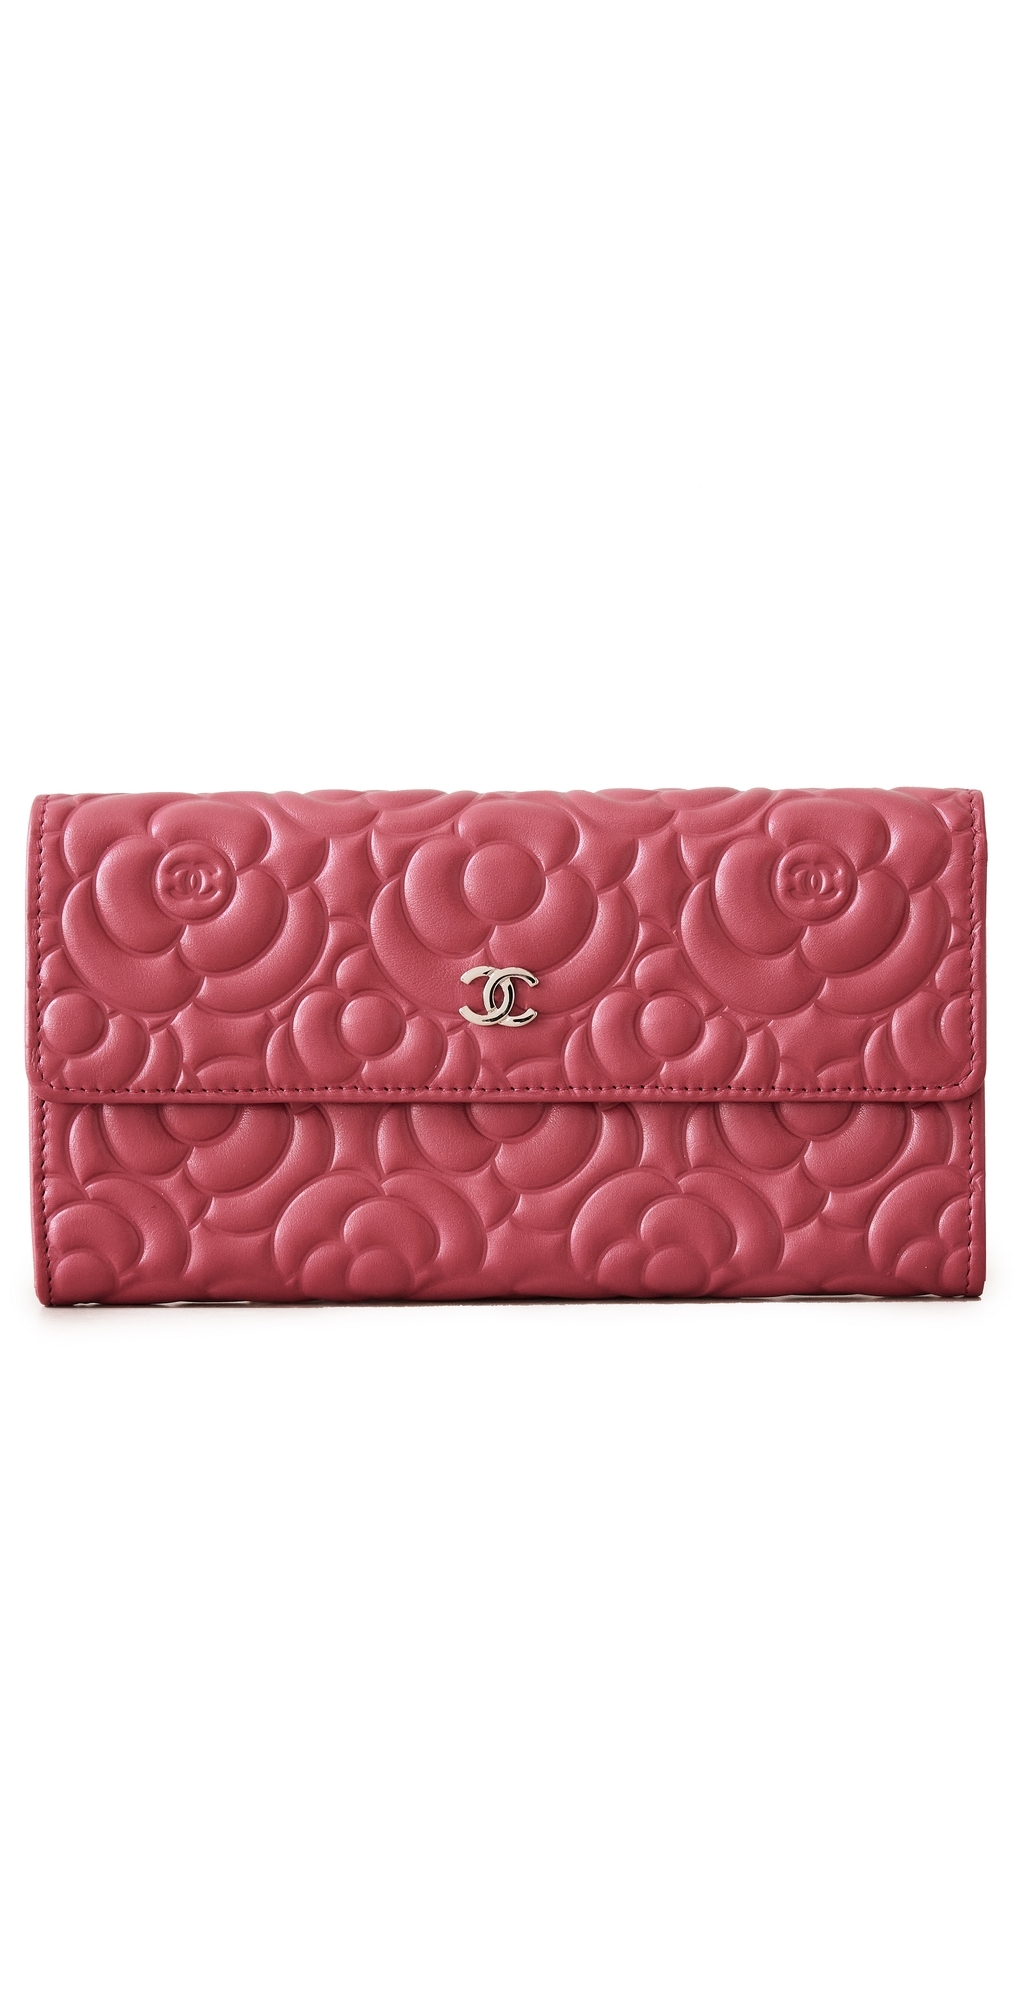 What Goes Around Comes Around Chanel Pink Lambskin Camellia Wallet